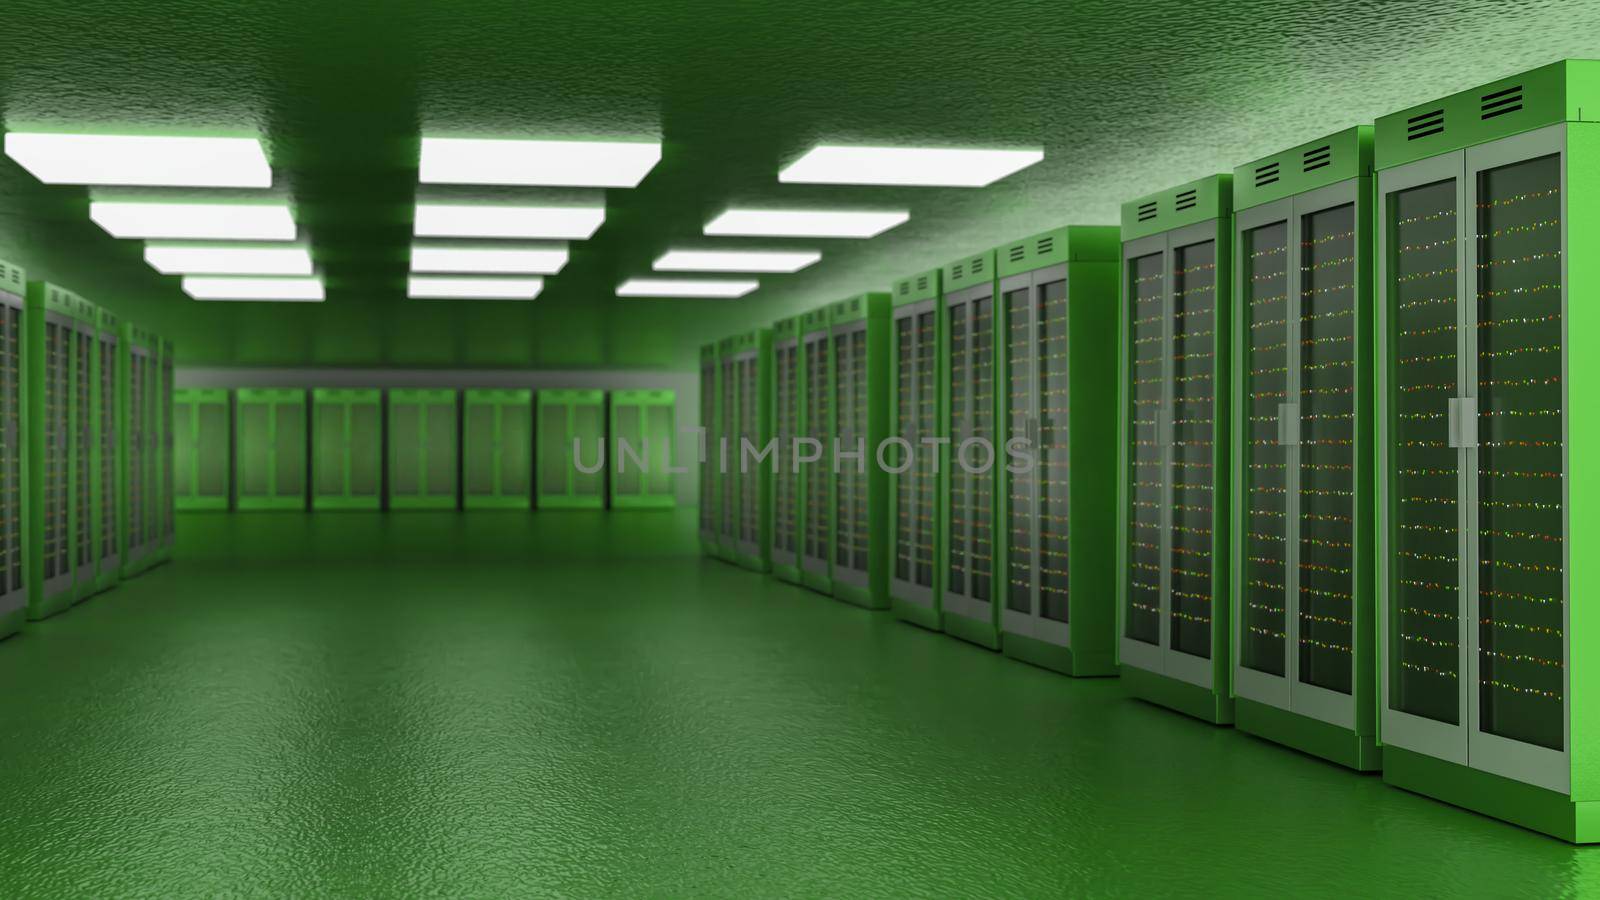 Servers. Servers room data center. Backup, mining, hosting, mainframe, farm and computer rack with storage information. 3d rendering by kwarkot